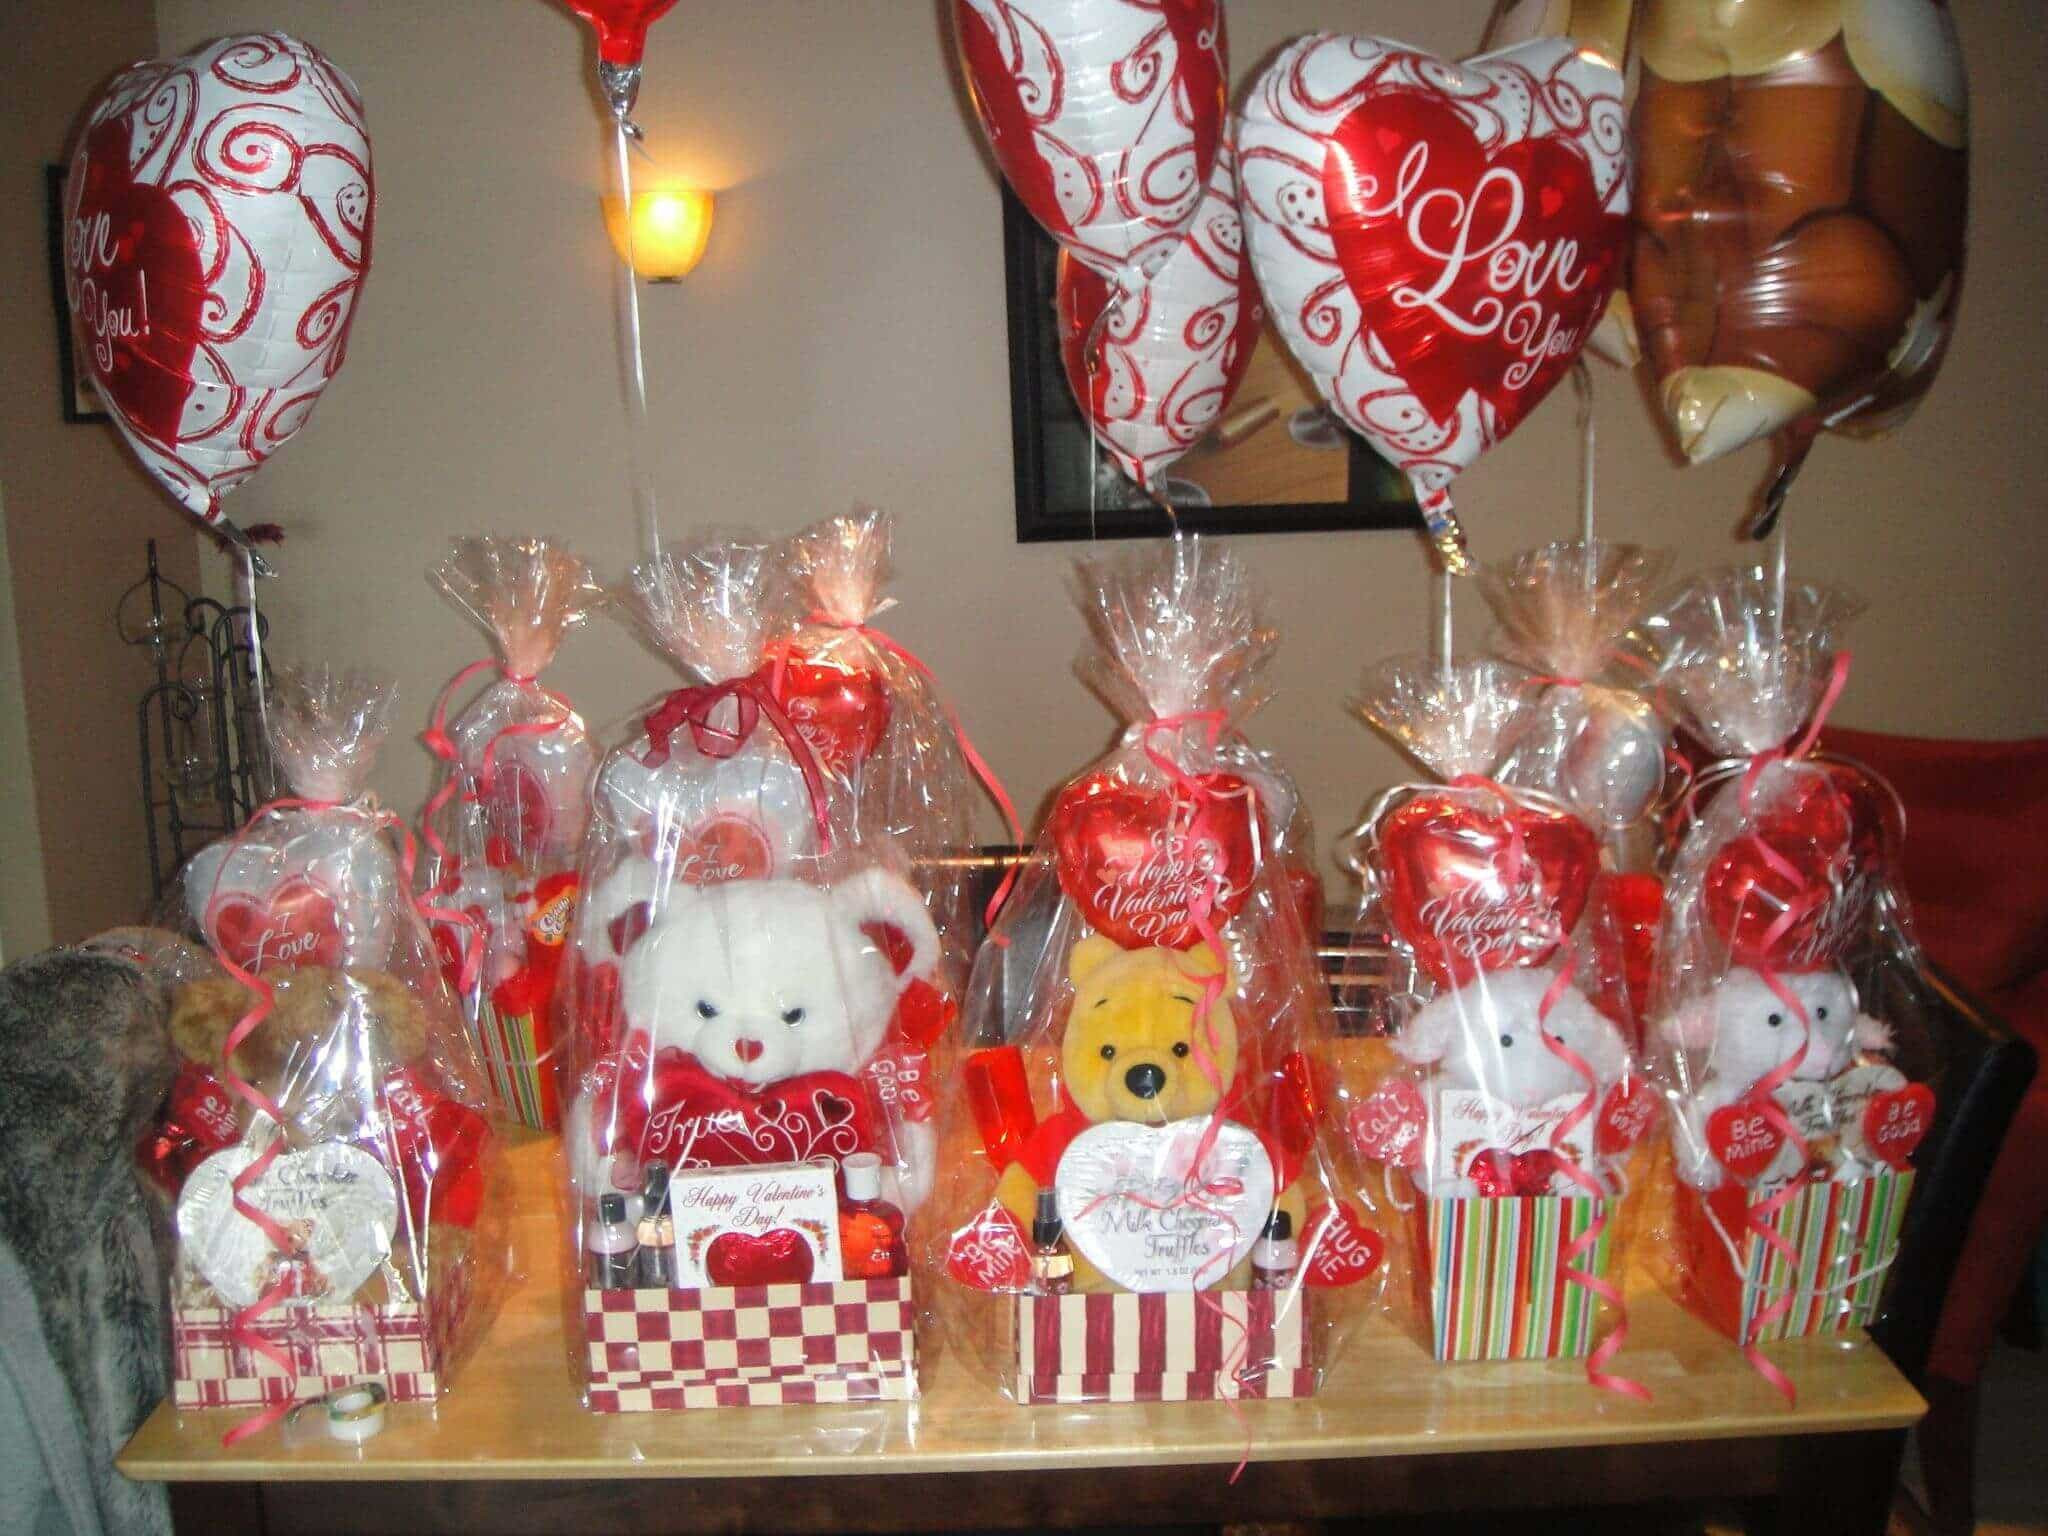 Valentine'S Day Gift Delivery Ideas
 Best Valentine s Day Gift Baskets Boxes & Gift Sets Ideas